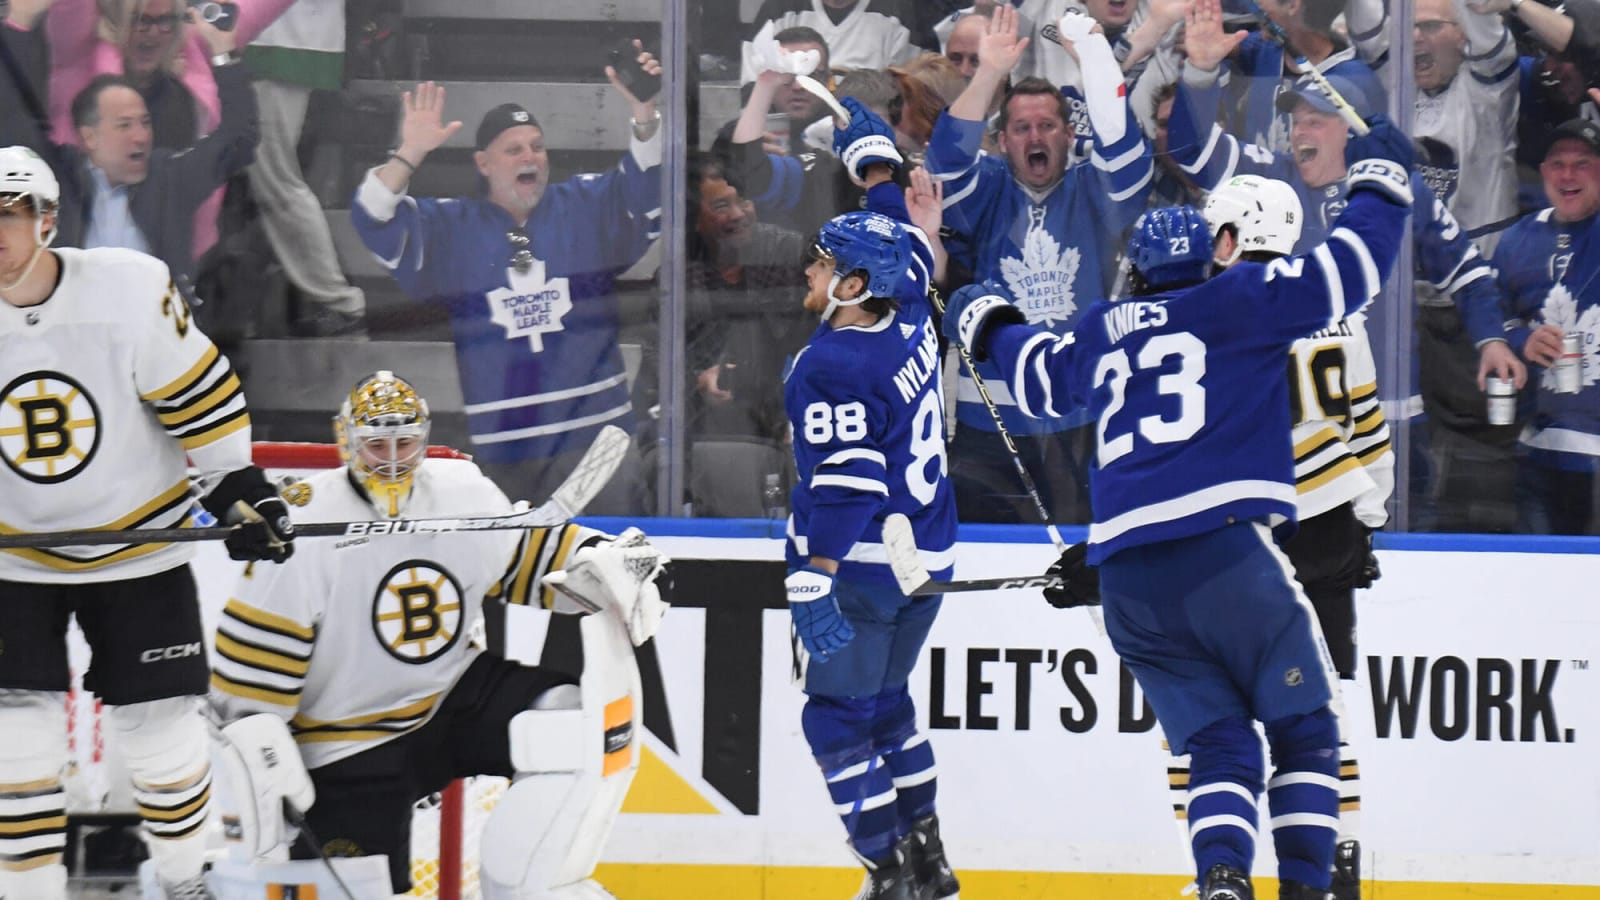 Game 6 takeaways: William Nylander is worth every cent for the Maple Leafs